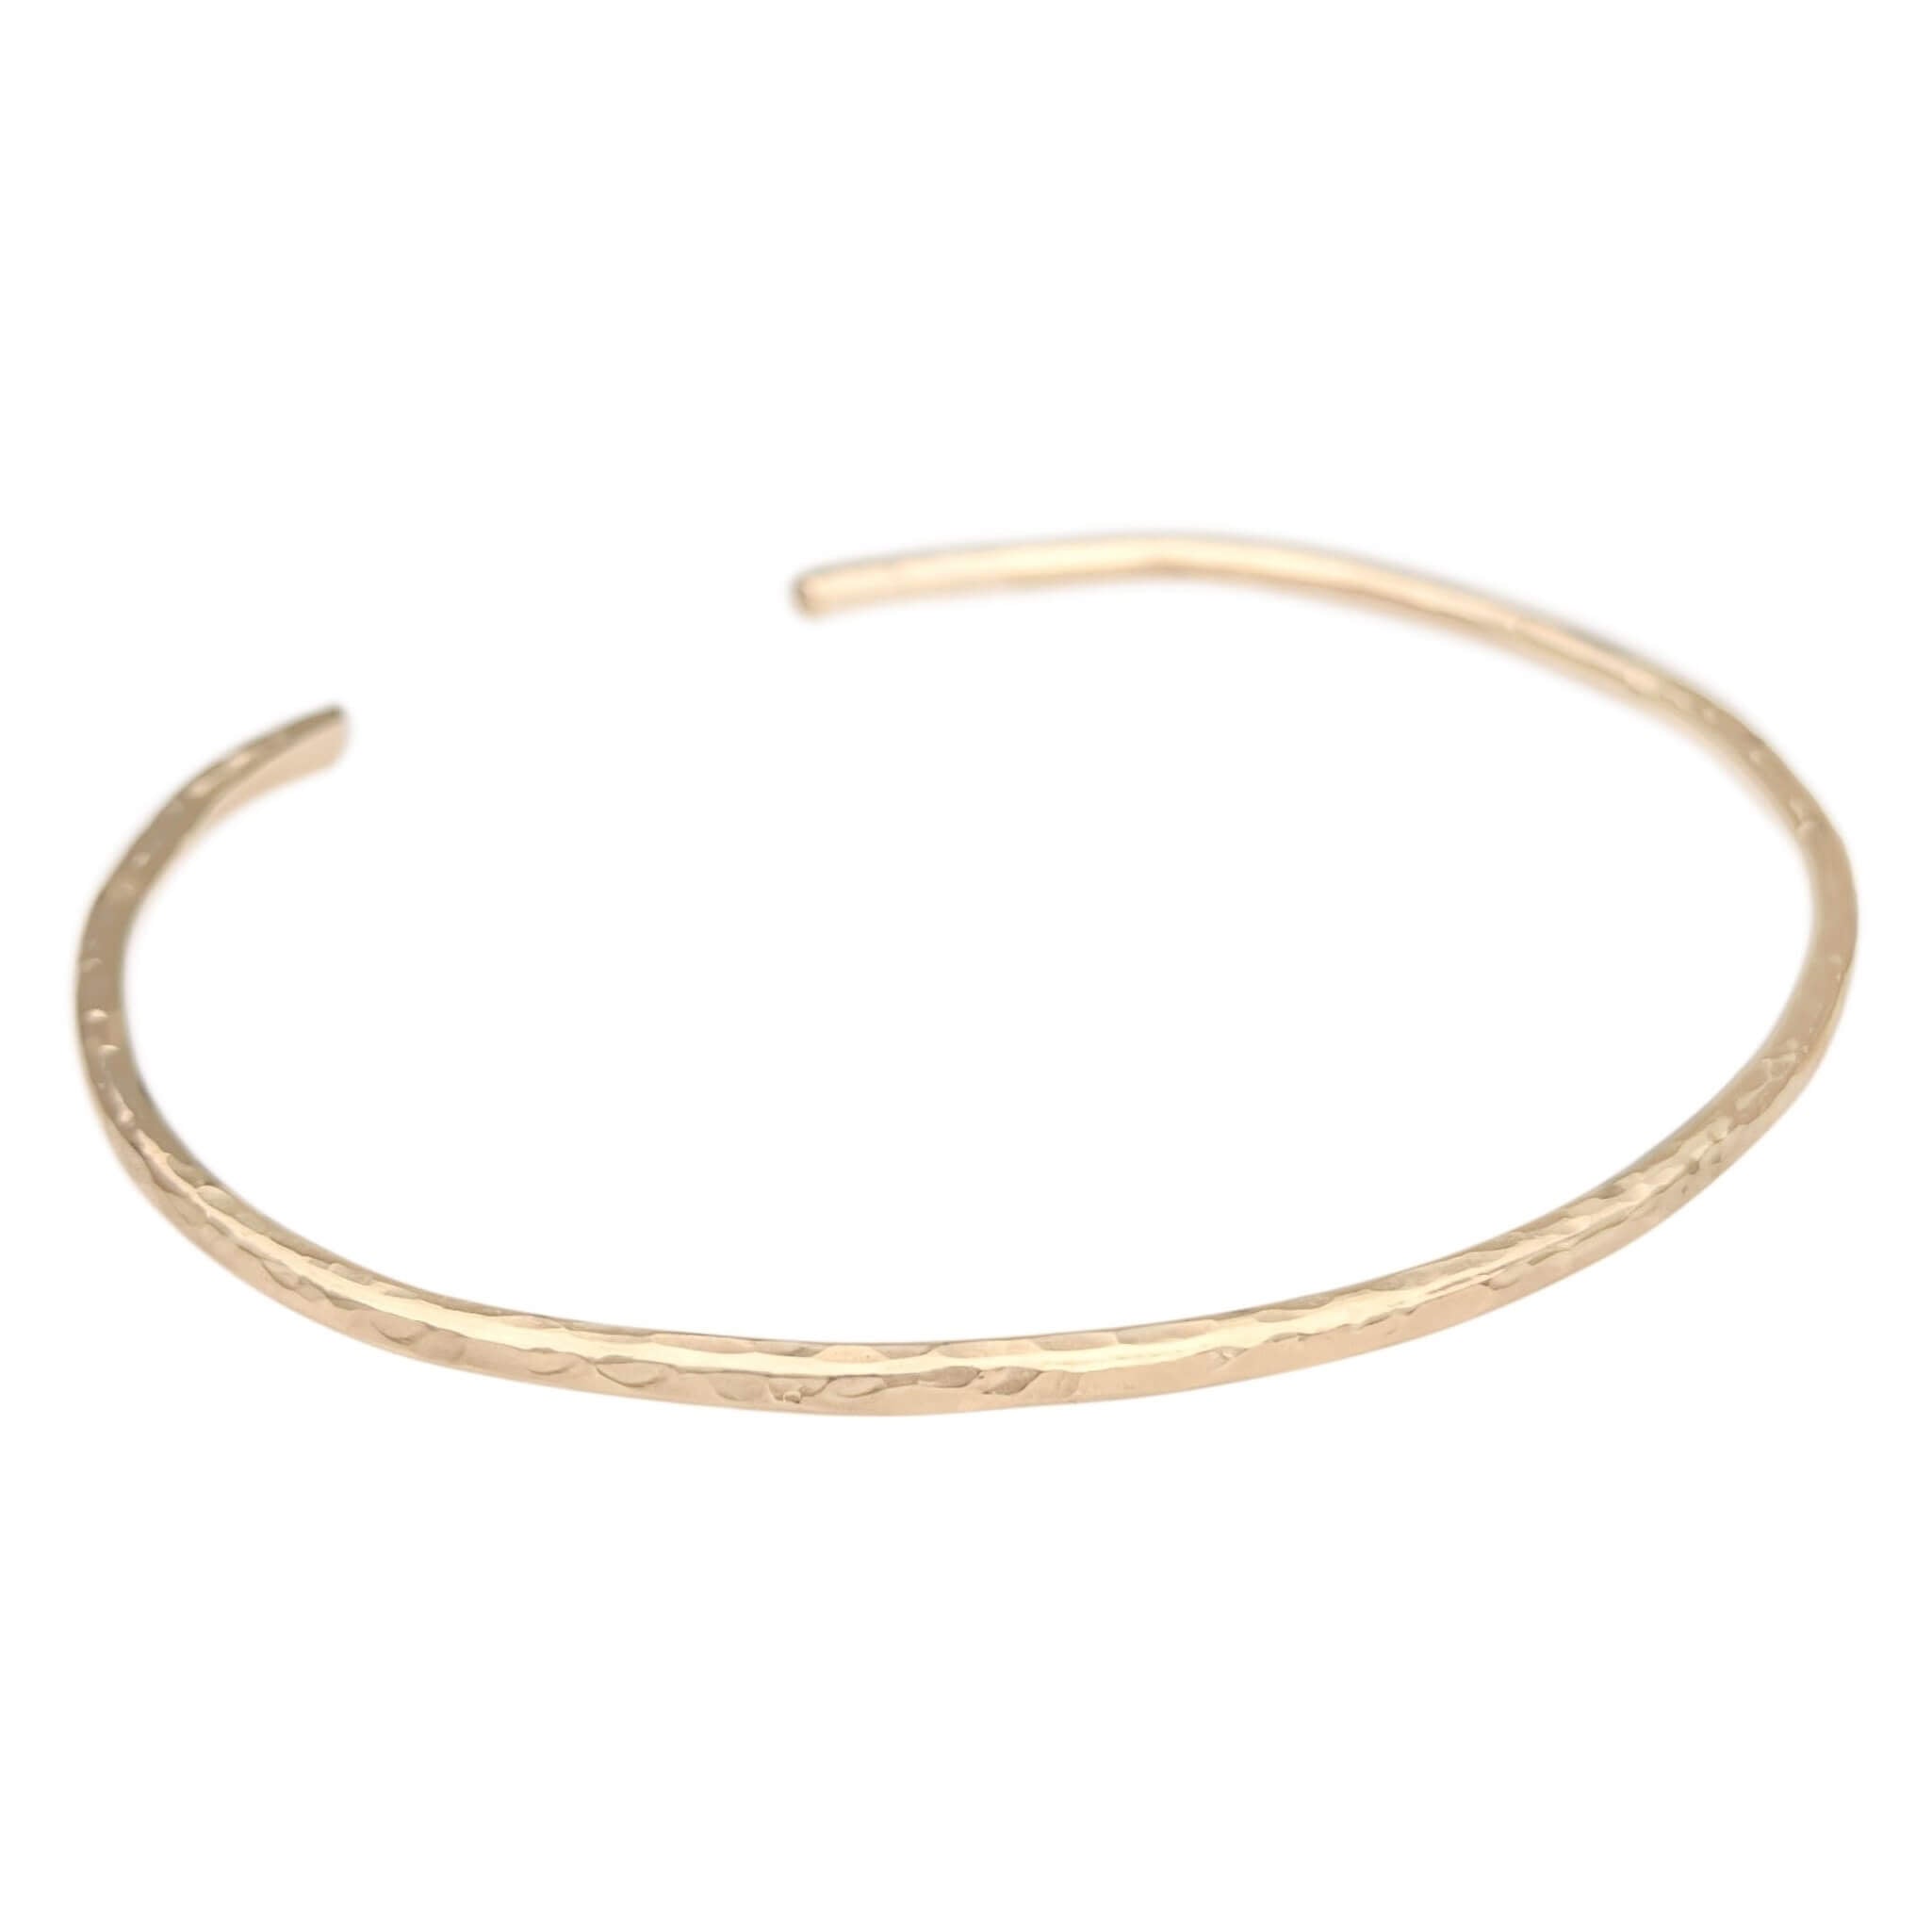 hammered cuff bracelet in gold filled on a white background